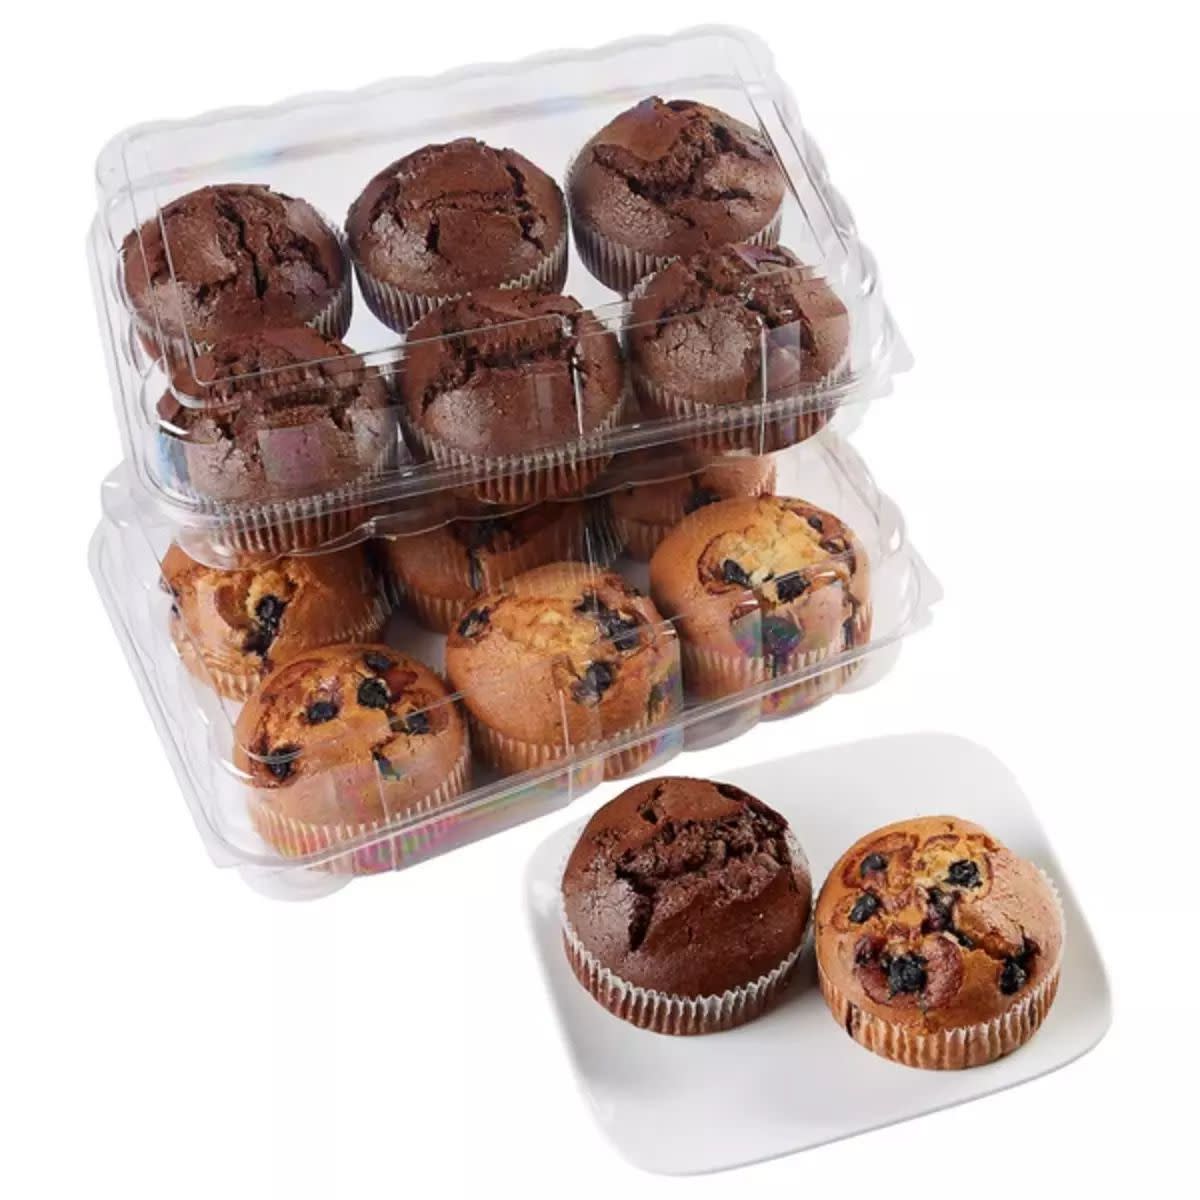 Kirkland Signature Muffins 12-Count 6 Blueberry 6 Double Chocolate